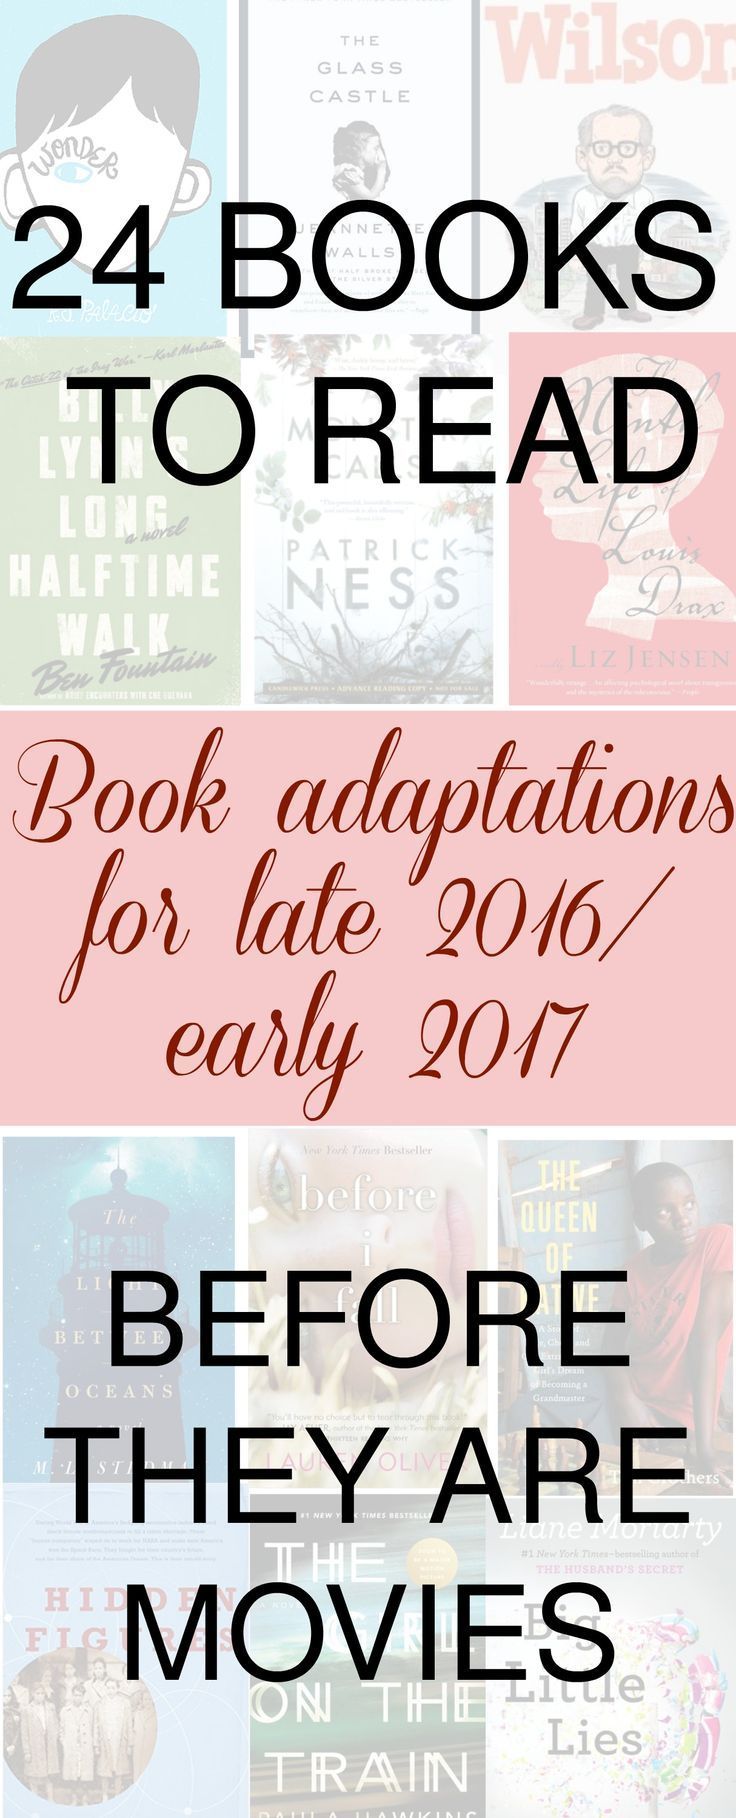 Your Guide To Book-to-Movie Adaptations for 2016/2017